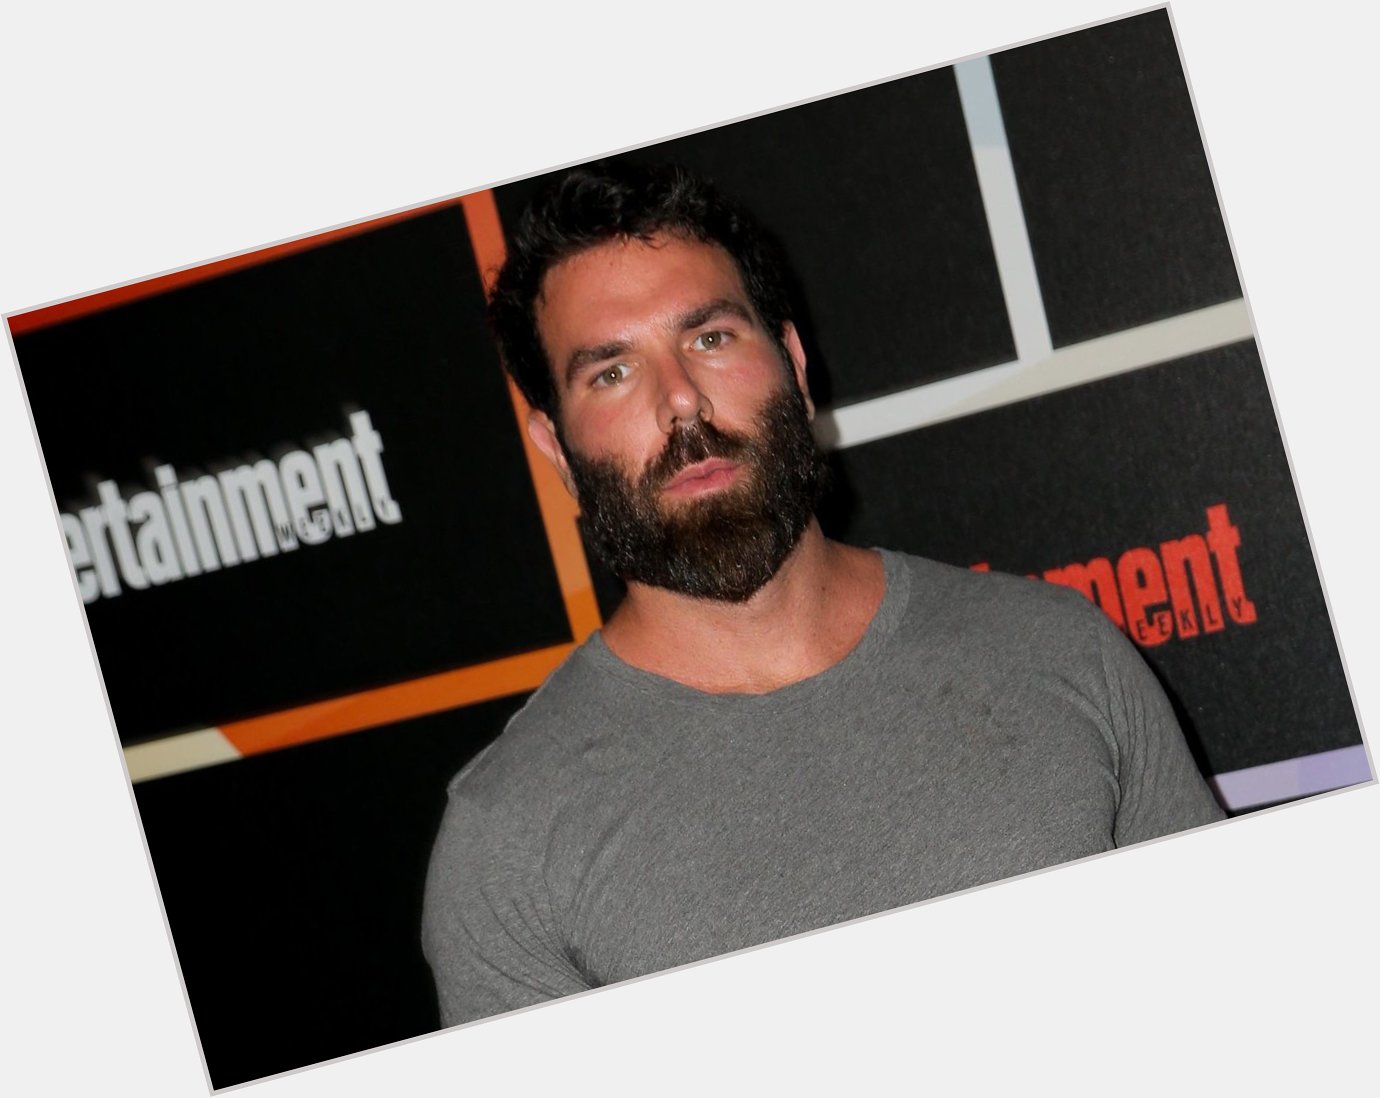 Happy Birthday to Dan Bilzerian! 

The internet personality, actor, and gambler turns 39 today. 